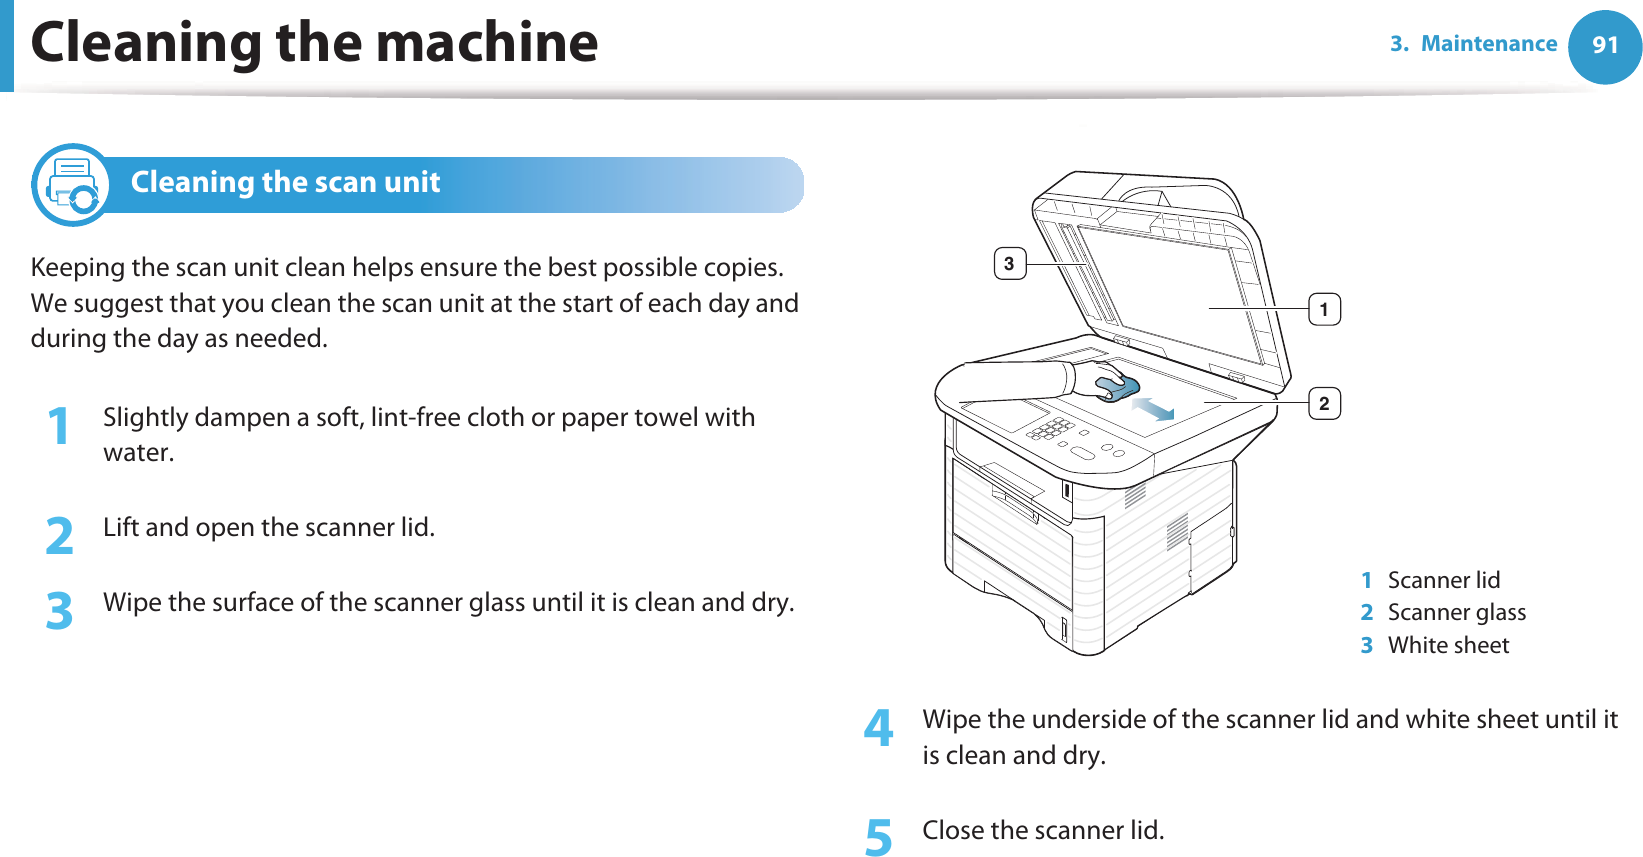 Cleaning the machine 913. Maintenance5 Cleaning the scan unitKeeping the scan unit clean helps ensure the best possible copies. We suggest that you clean the scan unit at the start of each day and during the day as needed.1Slightly dampen a soft, lint-free cloth or paper towel with water.2  Lift and open the scanner lid.3  Wipe the surface of the scanner glass until it is clean and dry.4  Wipe the underside of the scanner lid and white sheet until it is clean and dry.5  Close the scanner lid.1Scanner lid2Scanner glass3White sheet123